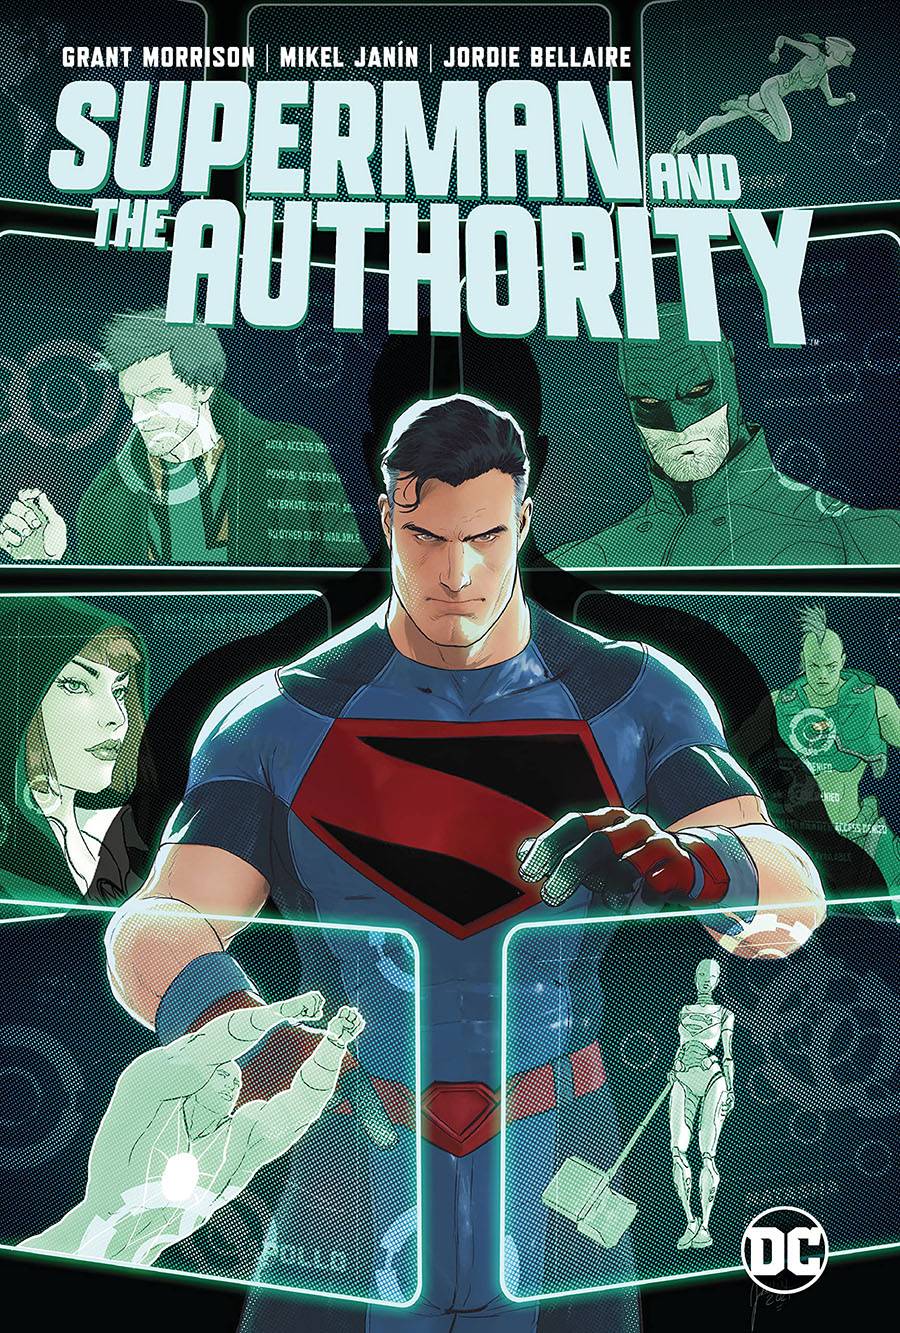 Superman And The Authority TP